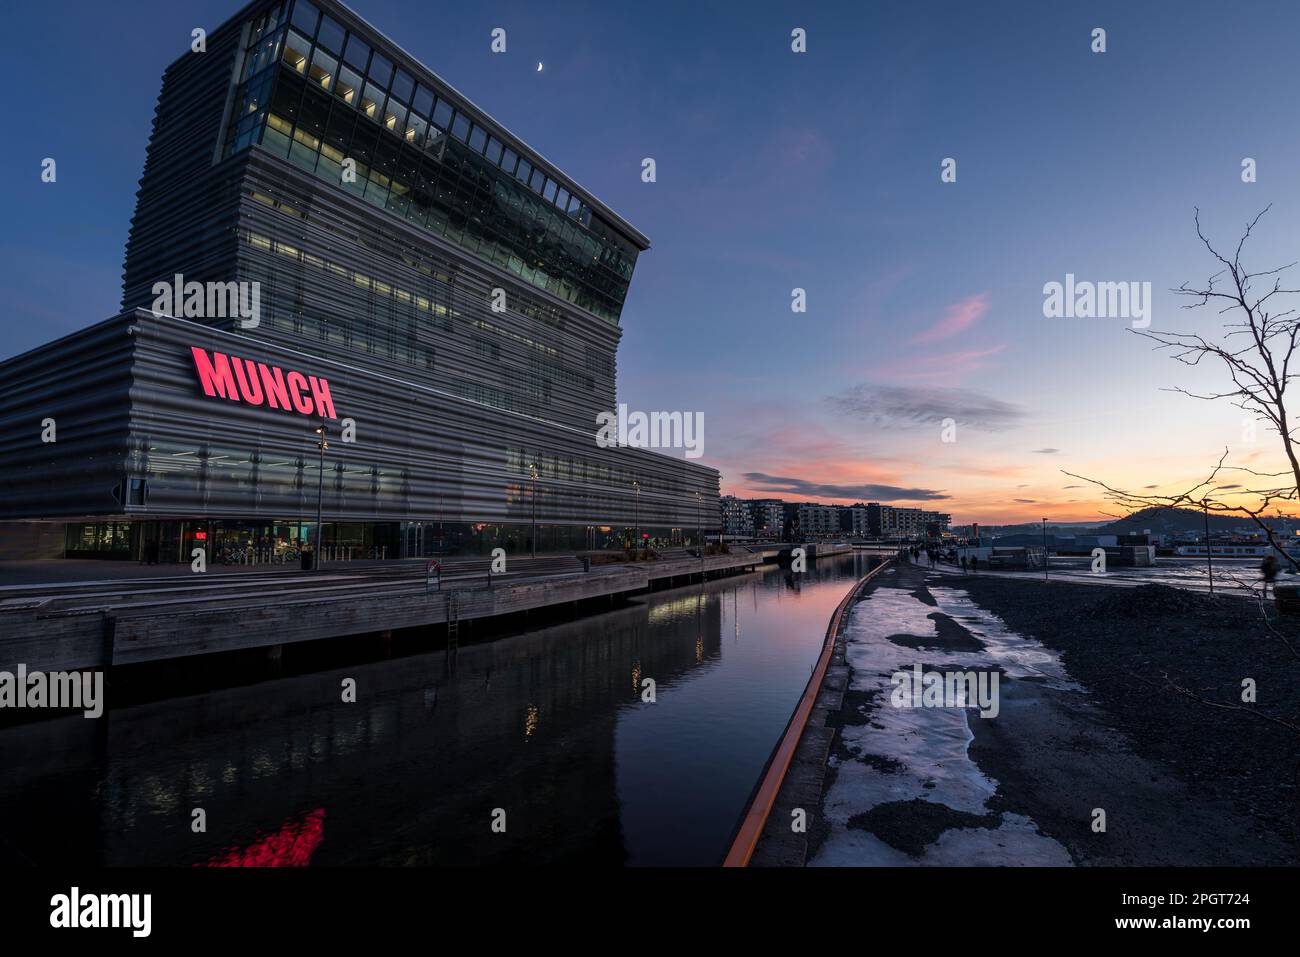 Newly built Munch Museum in Oslo seen at a winter night Stock Photo